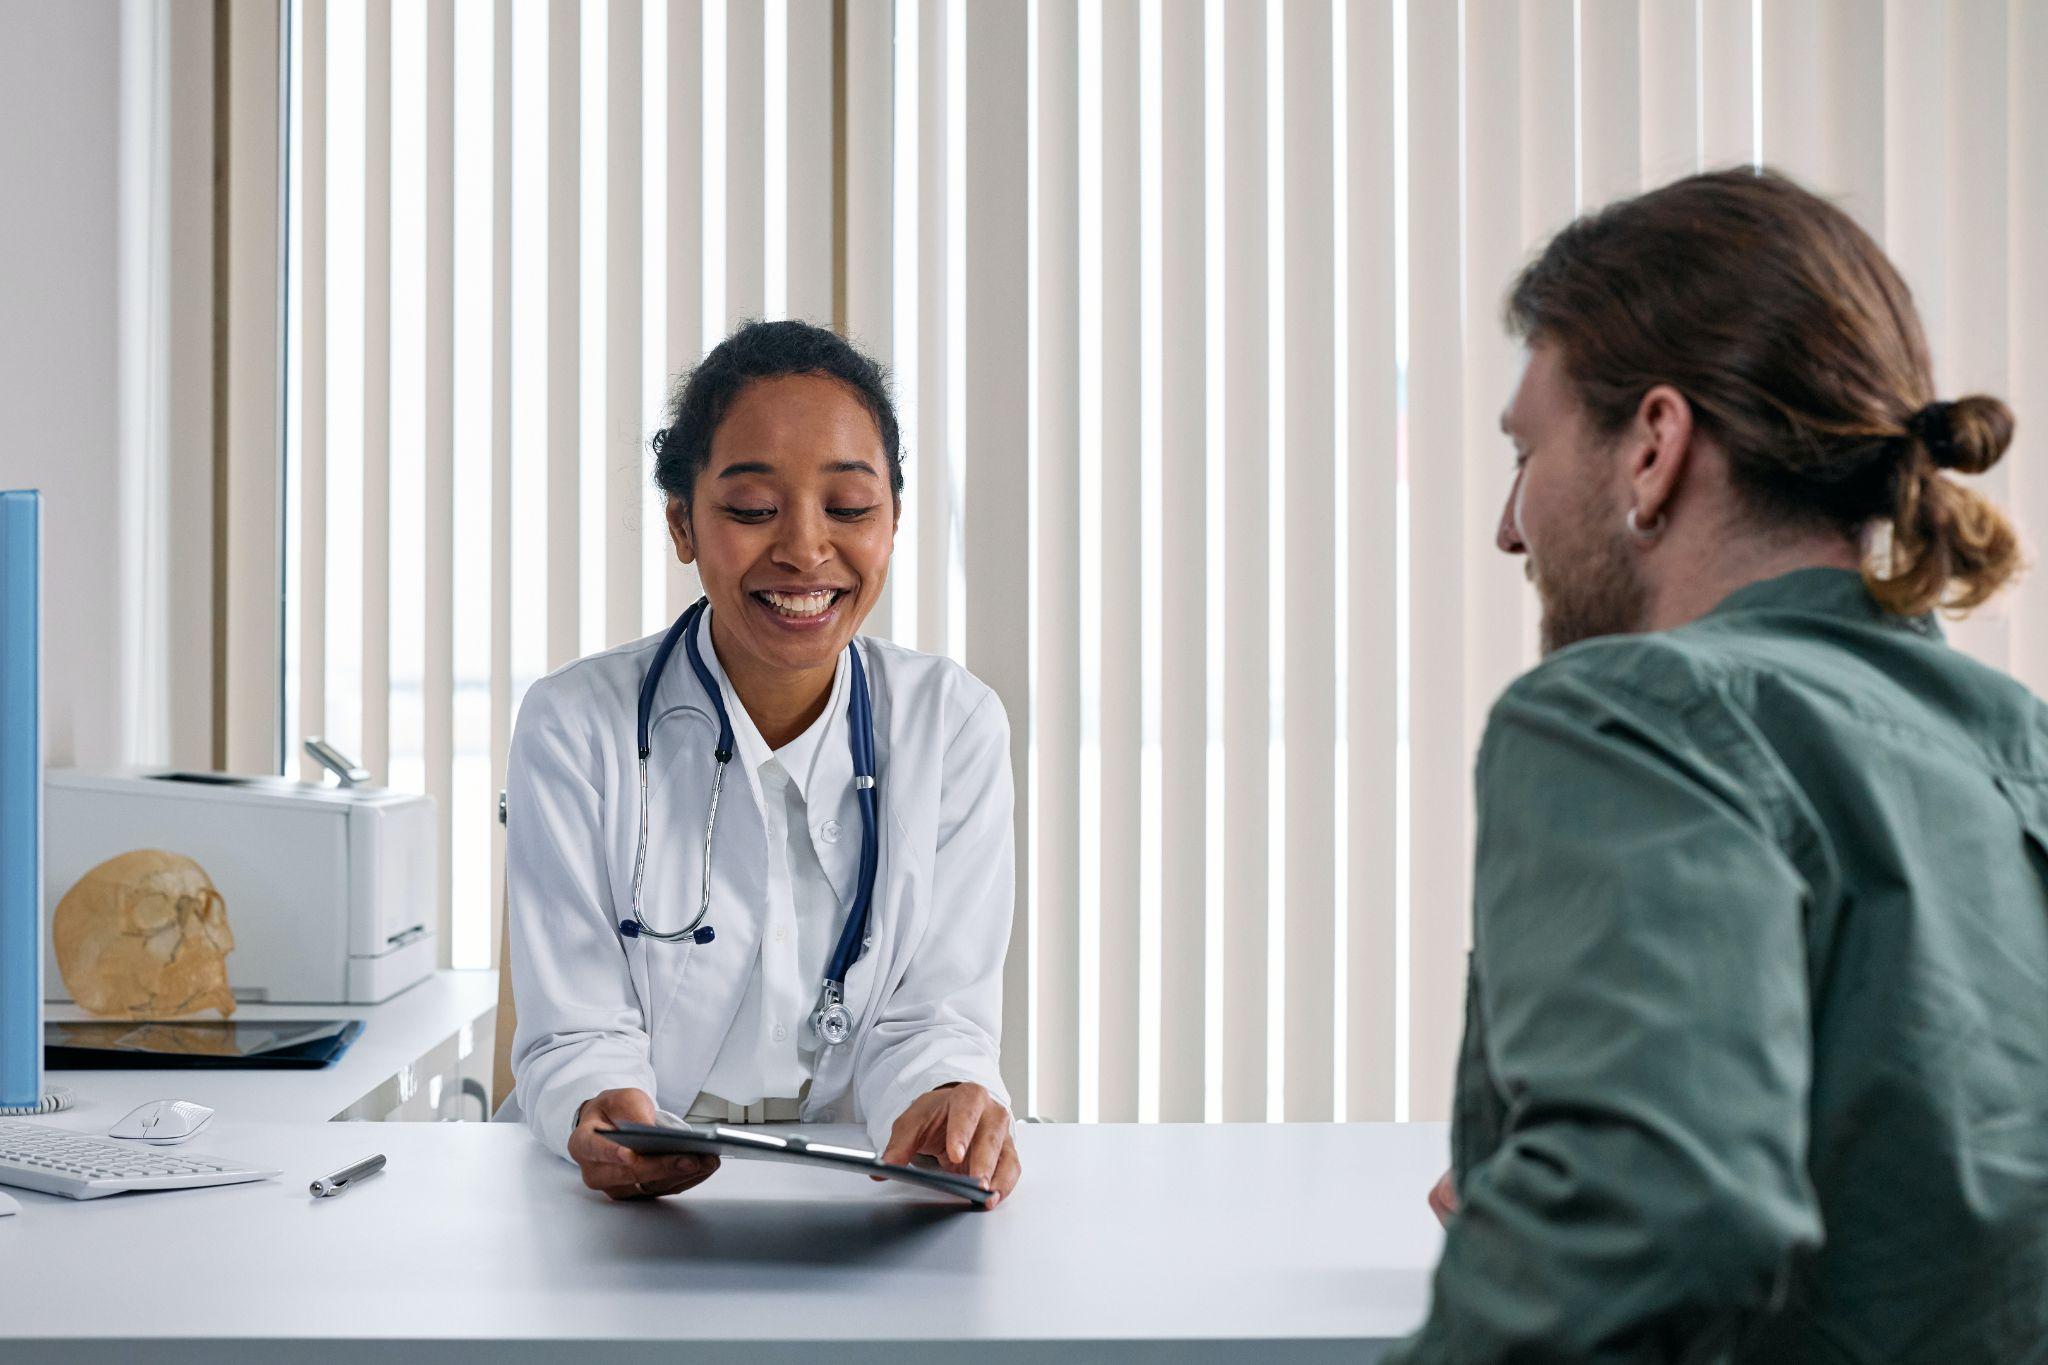 female doctor sitting across from male patient discussing his health